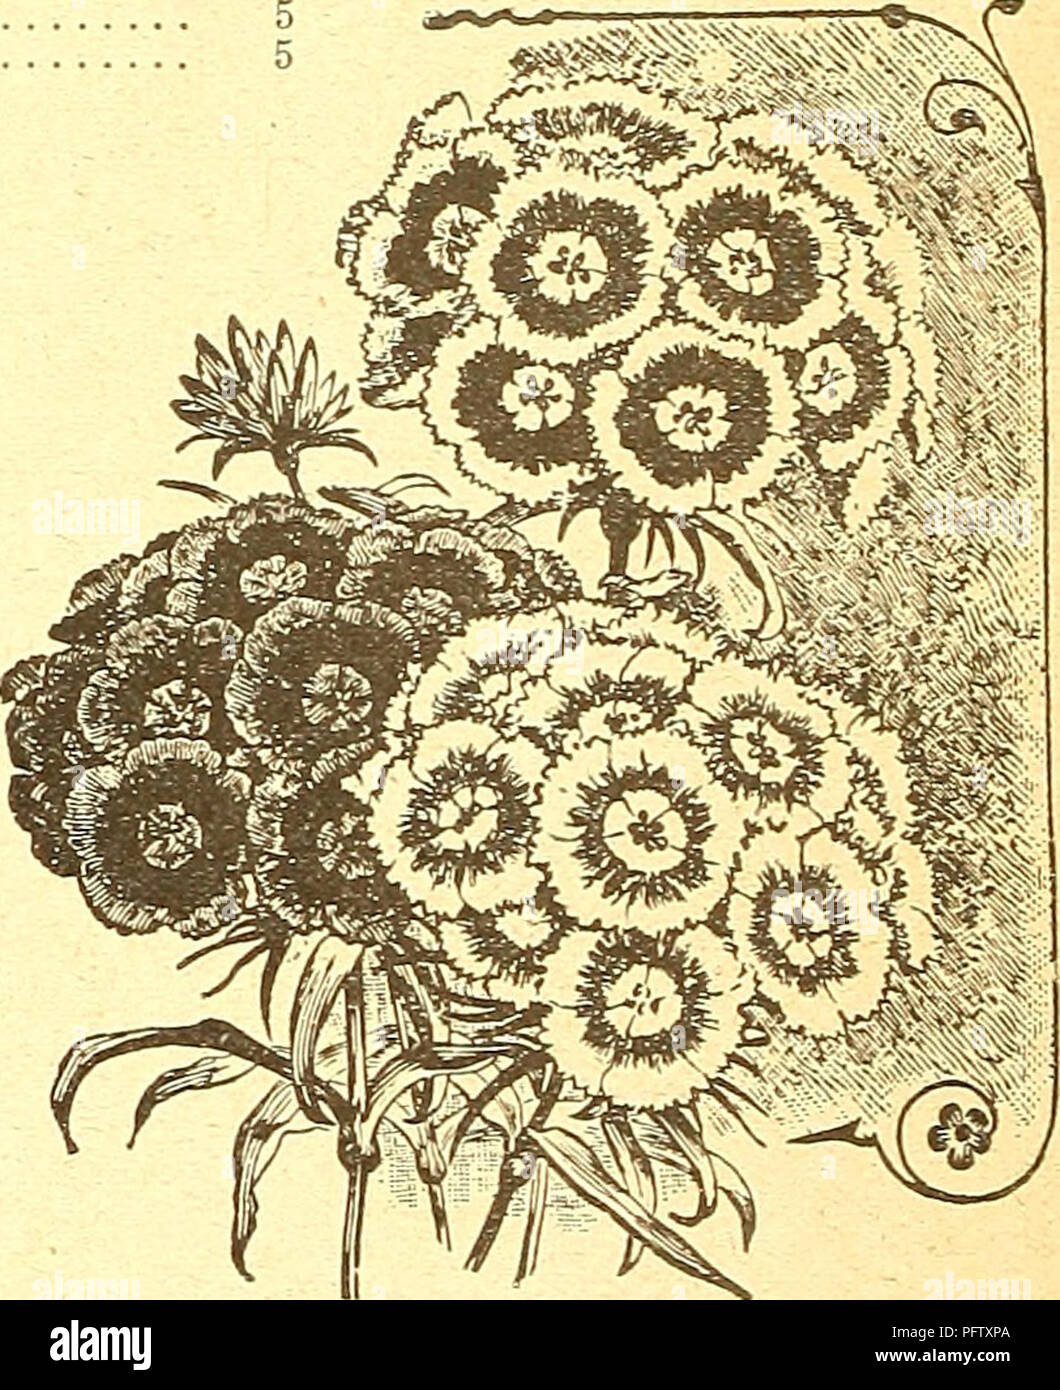 . Currie's farm and garden annual : spring 1924 49th year. Flowers Seeds Catalogs; Bulbs (Plants) Seeds Catalogs; Vegetables Seeds Catalogs; Nurseries (Horticulture) Catalogs; Plants, Ornamental Catalogs; Gardening Equipment and supplies Catalogs. SCABIOSA. Mourning Bride or S«eet Scabiosus. Very desirable plants, producing very pretty flowers of many colors In g-reat profusion. Good for cutting for vases, etc. H. A. Pkt. Divarf Double—Flowers very double and globular. 14 oz. 25c. 5 Leviathan Jlixed—Large and beautiful double flowers; tall growing. % oz. 25c. 5 PEREXXIAL, SCABIOUS. Cauoasica—S Stock Photo